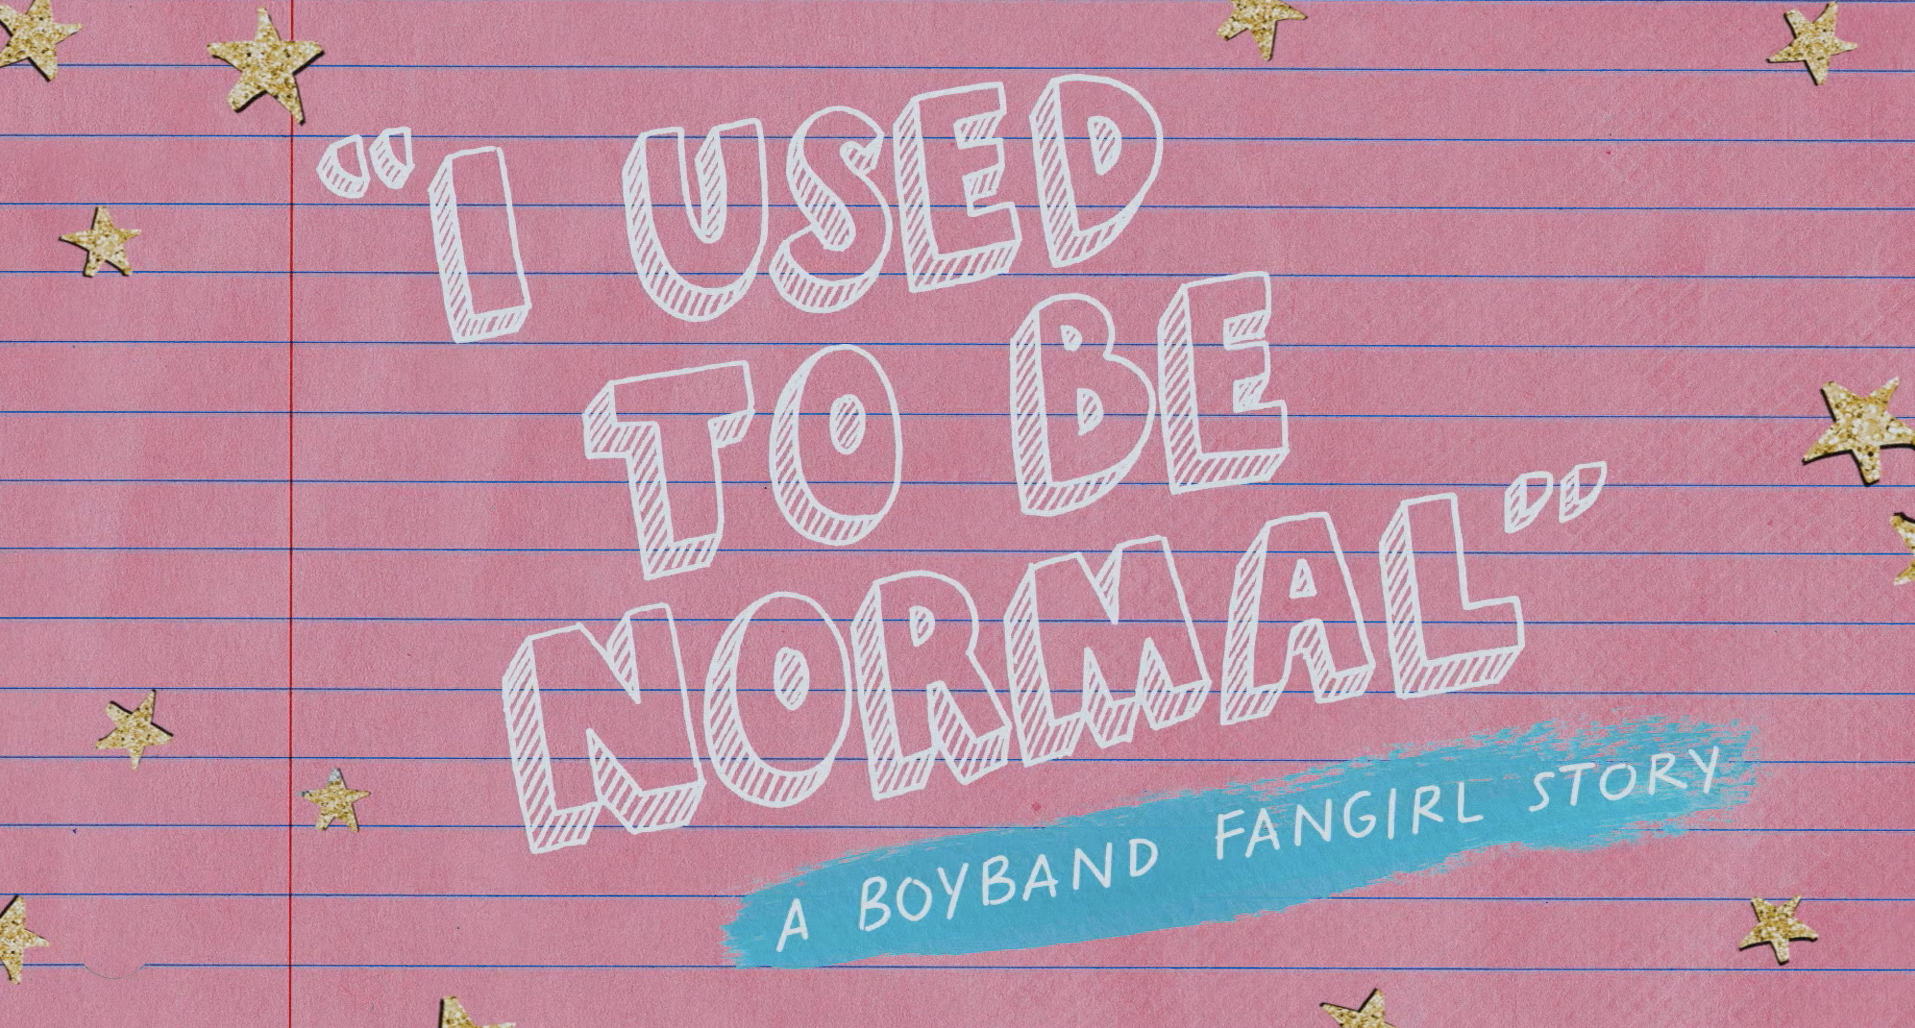 A Boyband Fangirl Story is Totally Not Normal #movietrailer